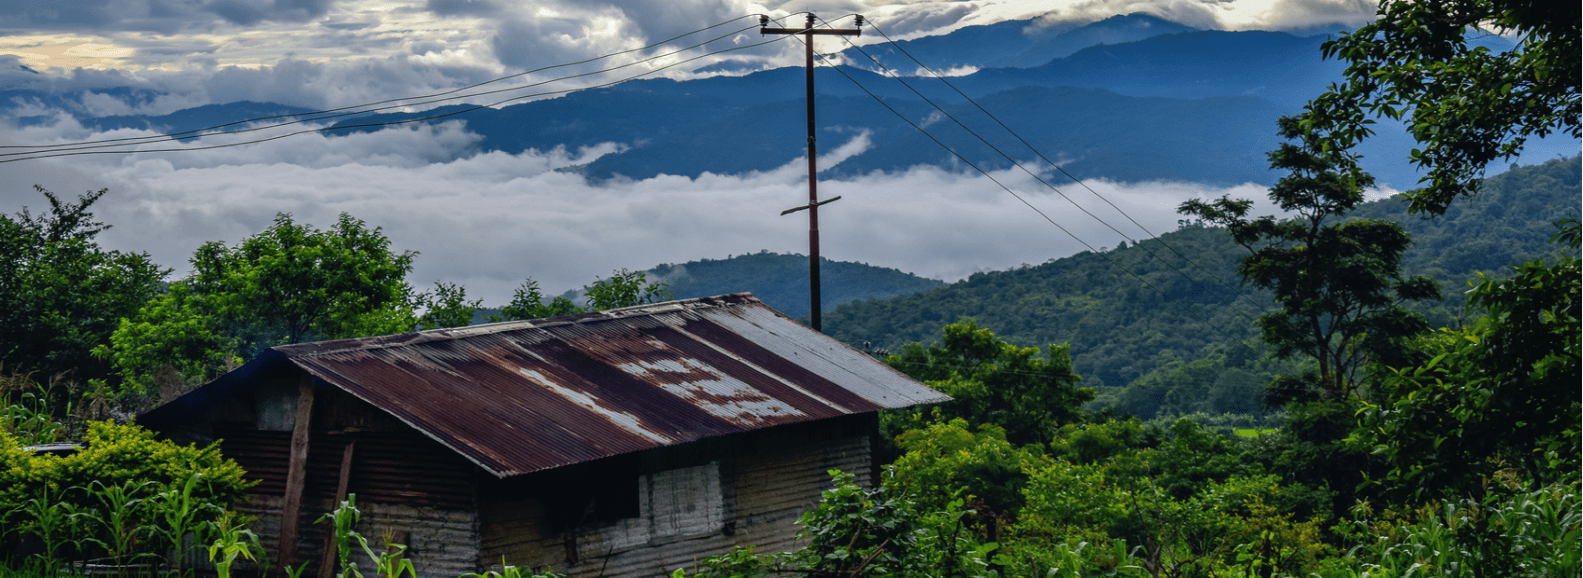 Picturesque view of Kohima Mountains with clouds floating